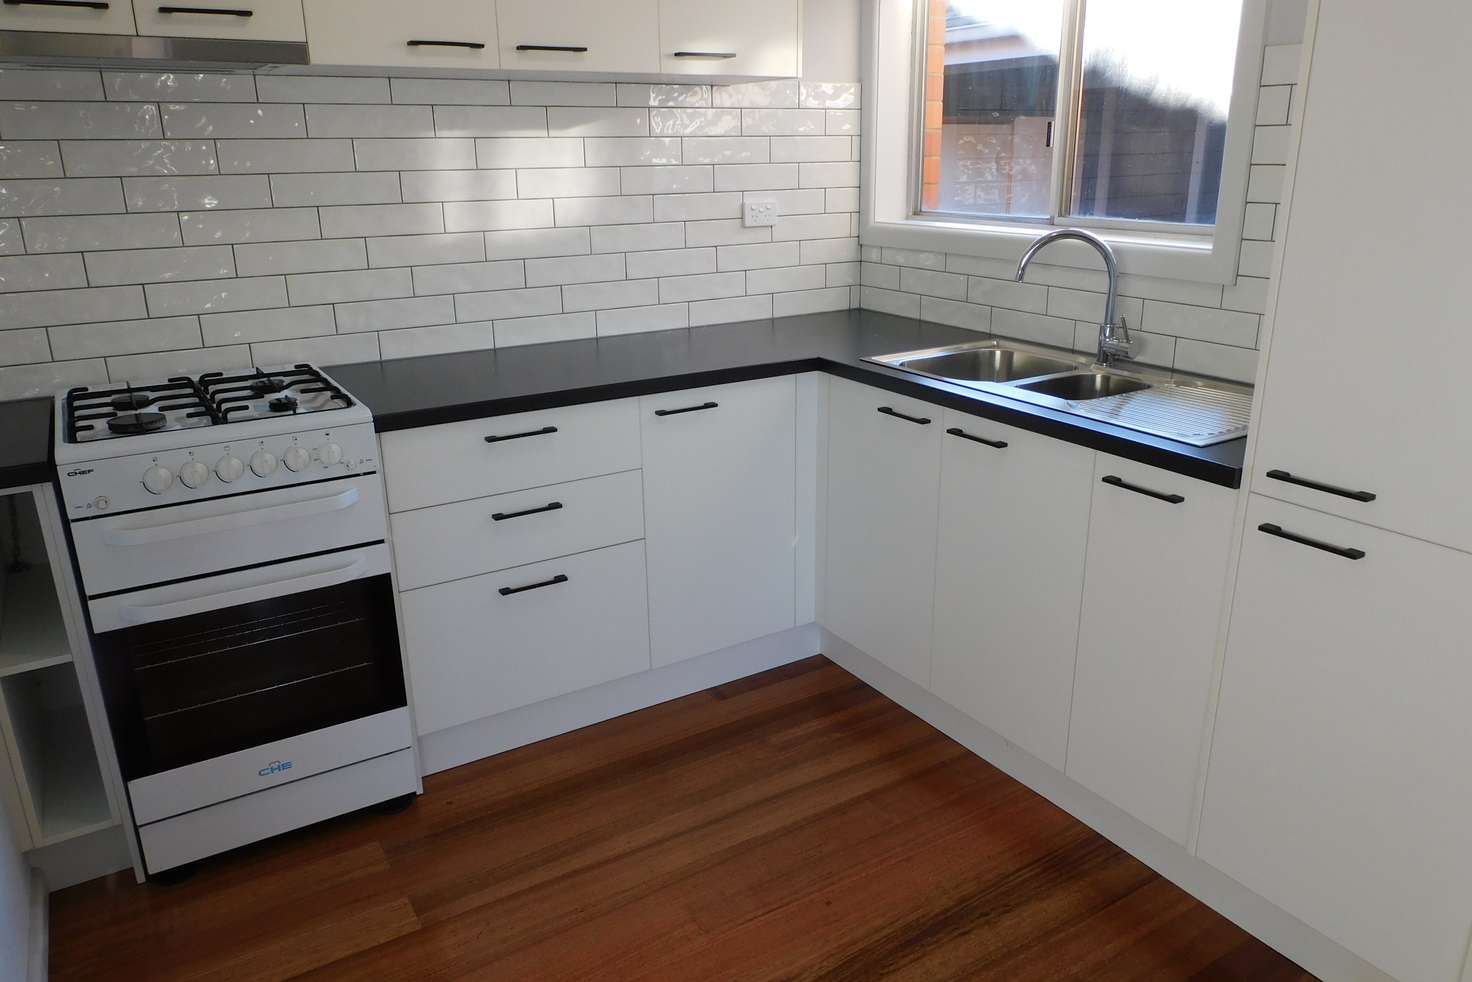 Main view of Homely unit listing, 4/1 Curie St., Pascoe Vale VIC 3044